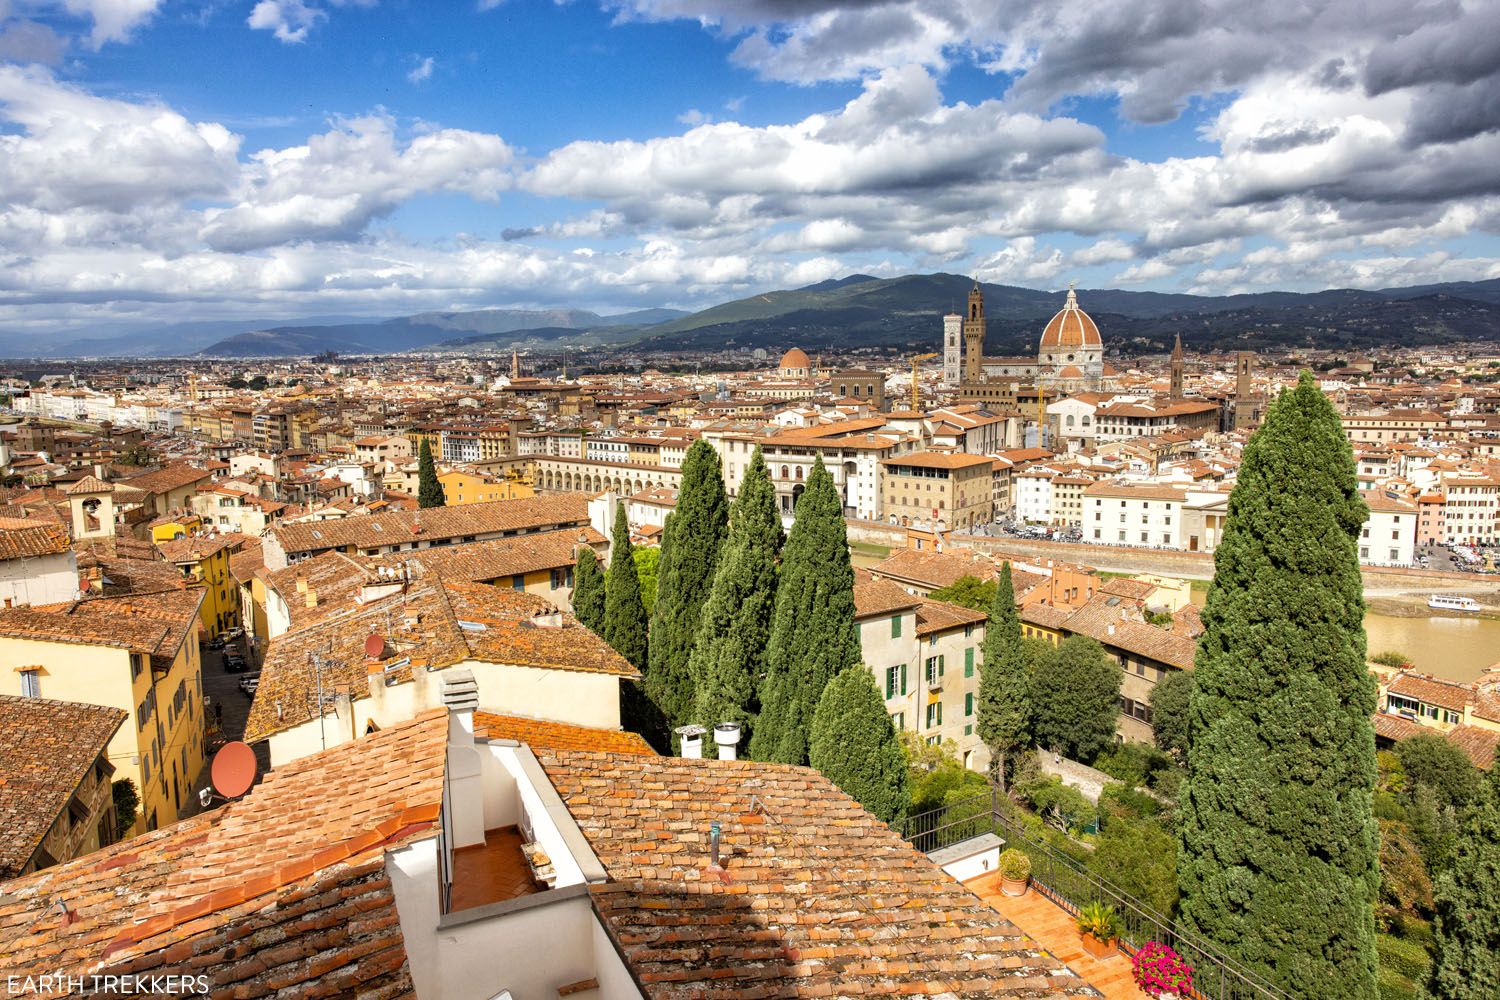 Villa Bardini View of Florence | Best Things to Do in Florence